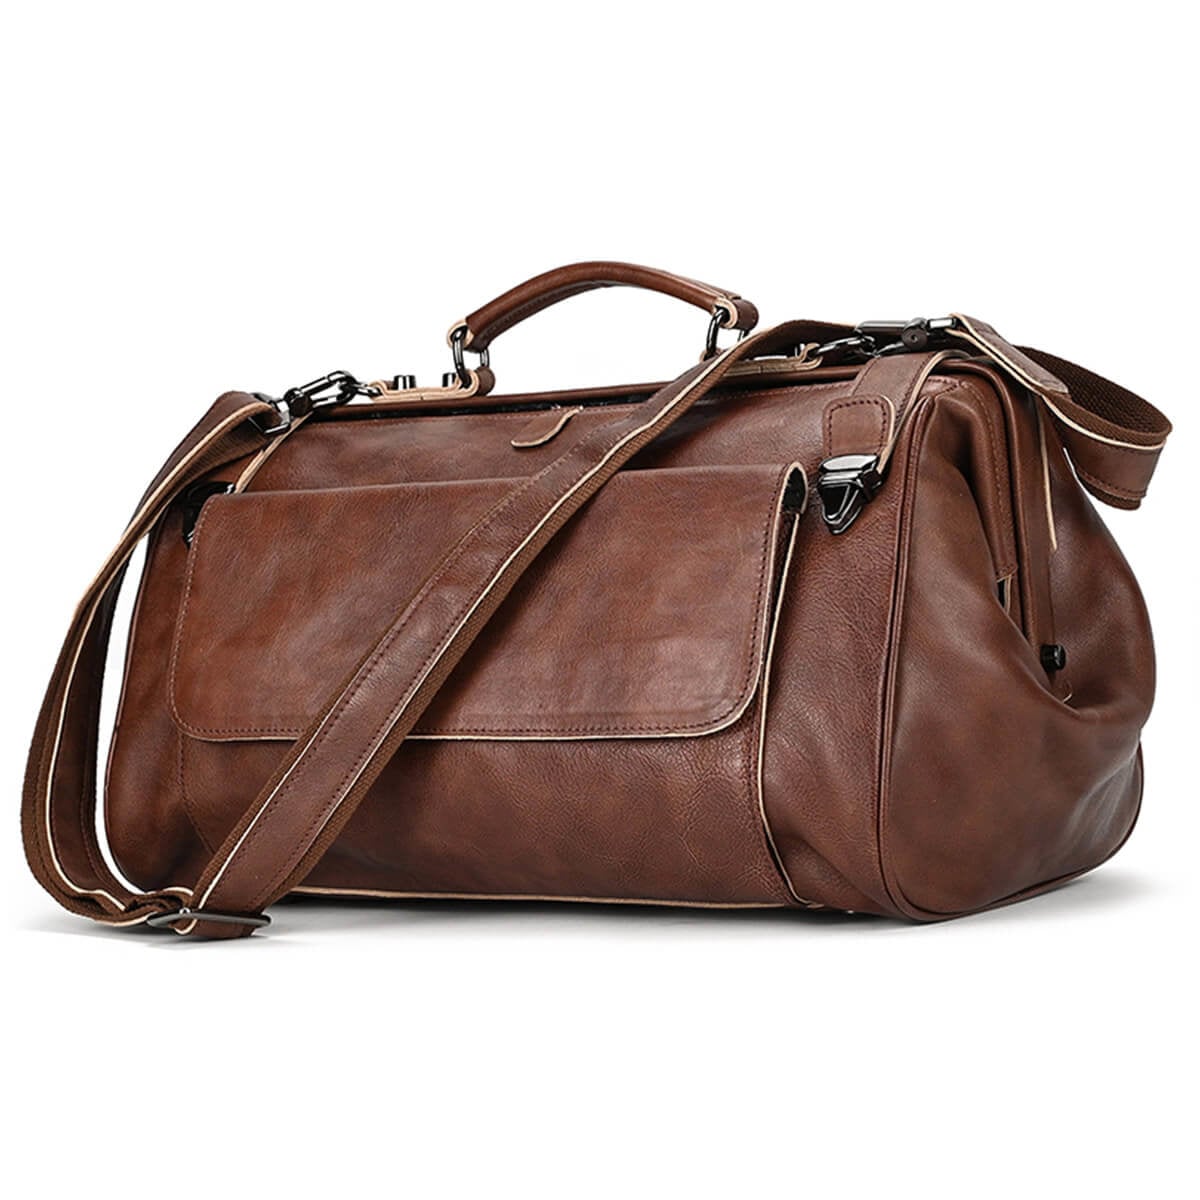 Top Quality Genuine Leather Duffle Bag